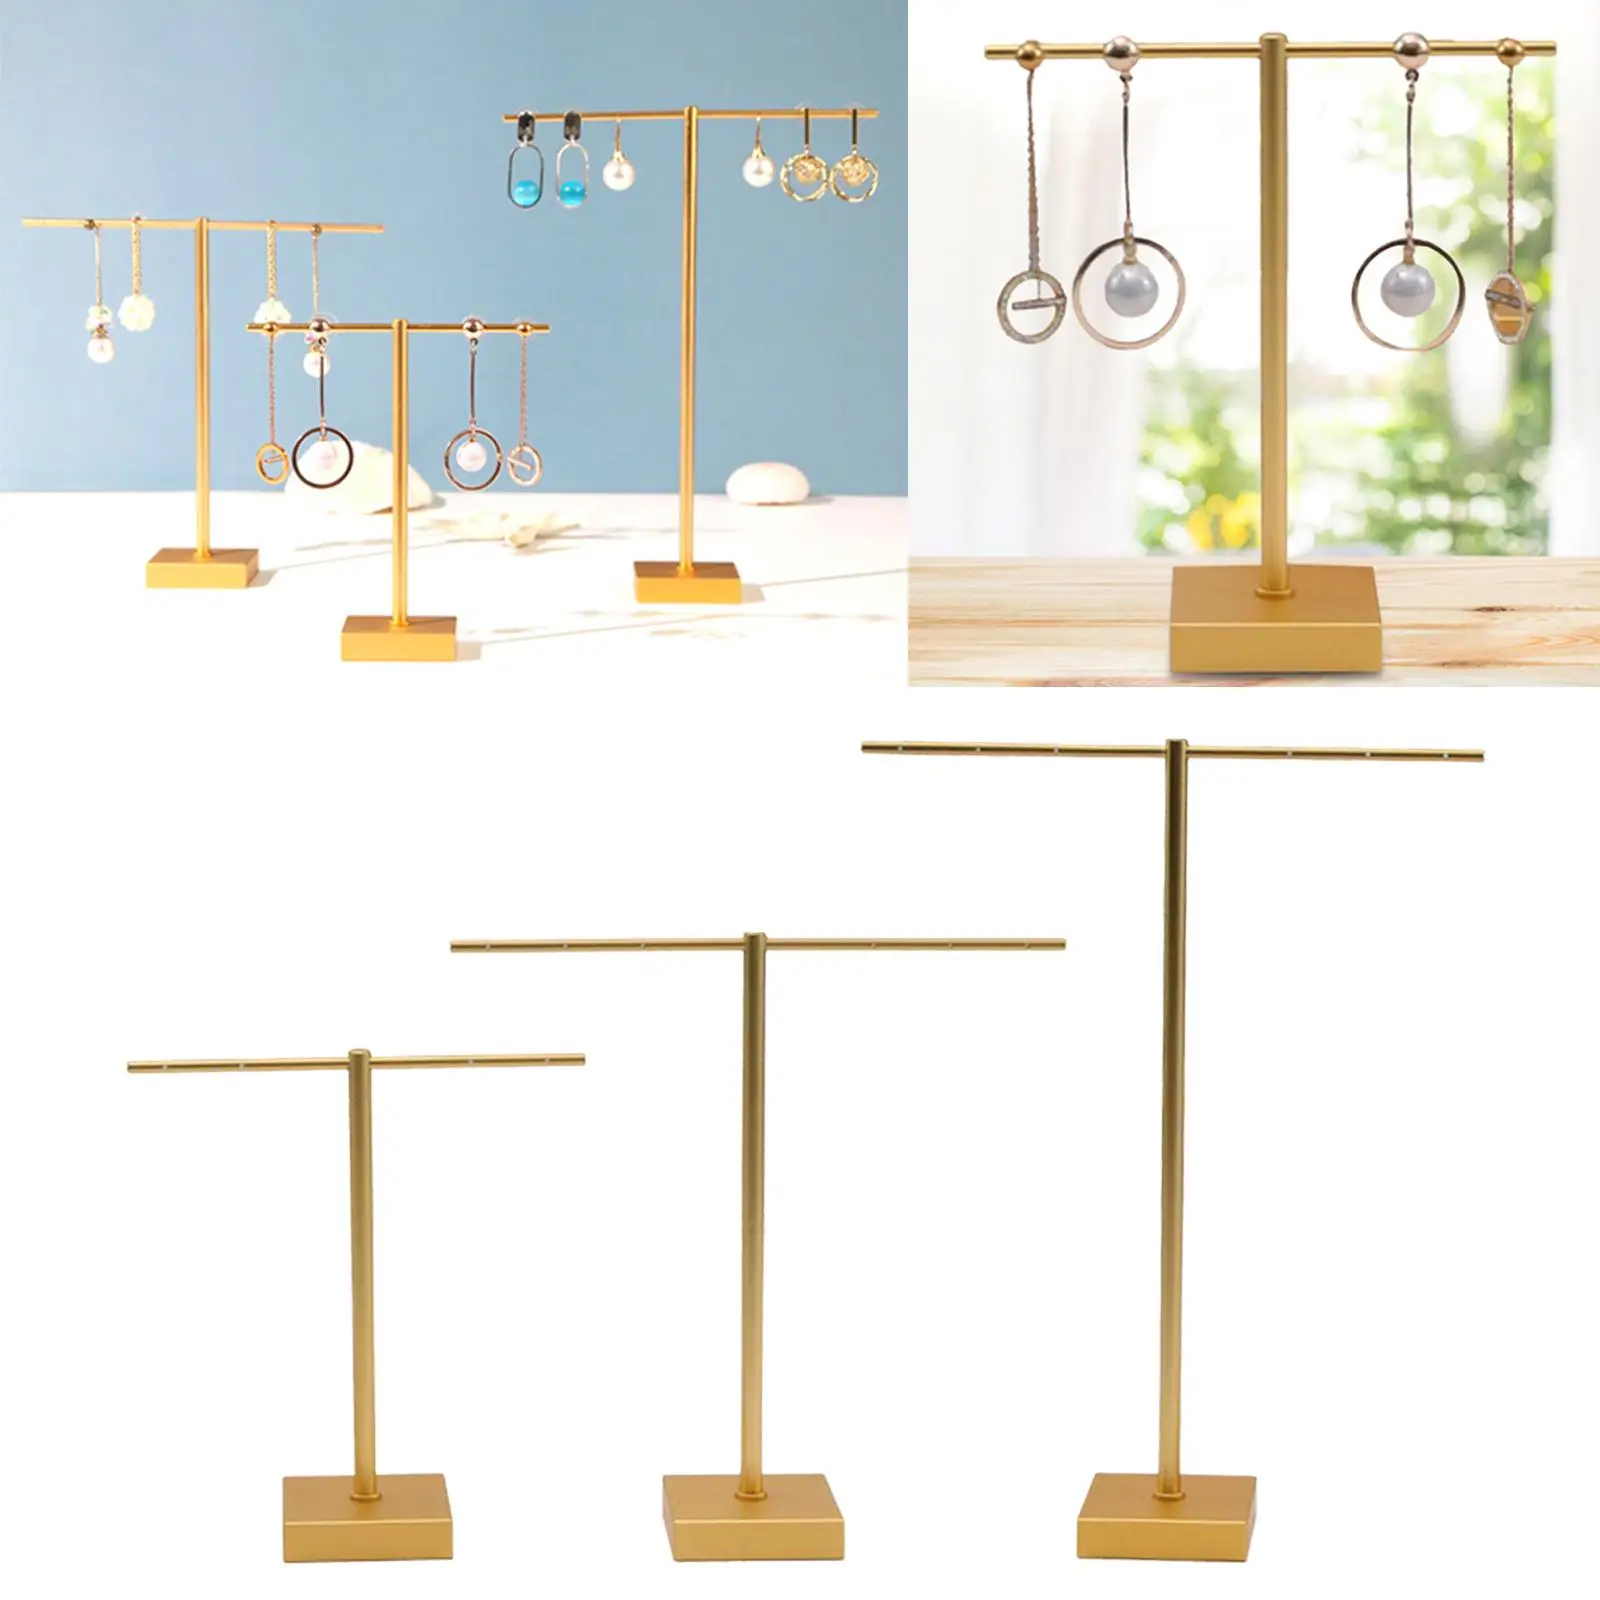 Jewelry Display Stand Organizer T Shaped with Base Shelf Earrings Holder for Show Jewelry Pendant Watches Tabletop Retail Store